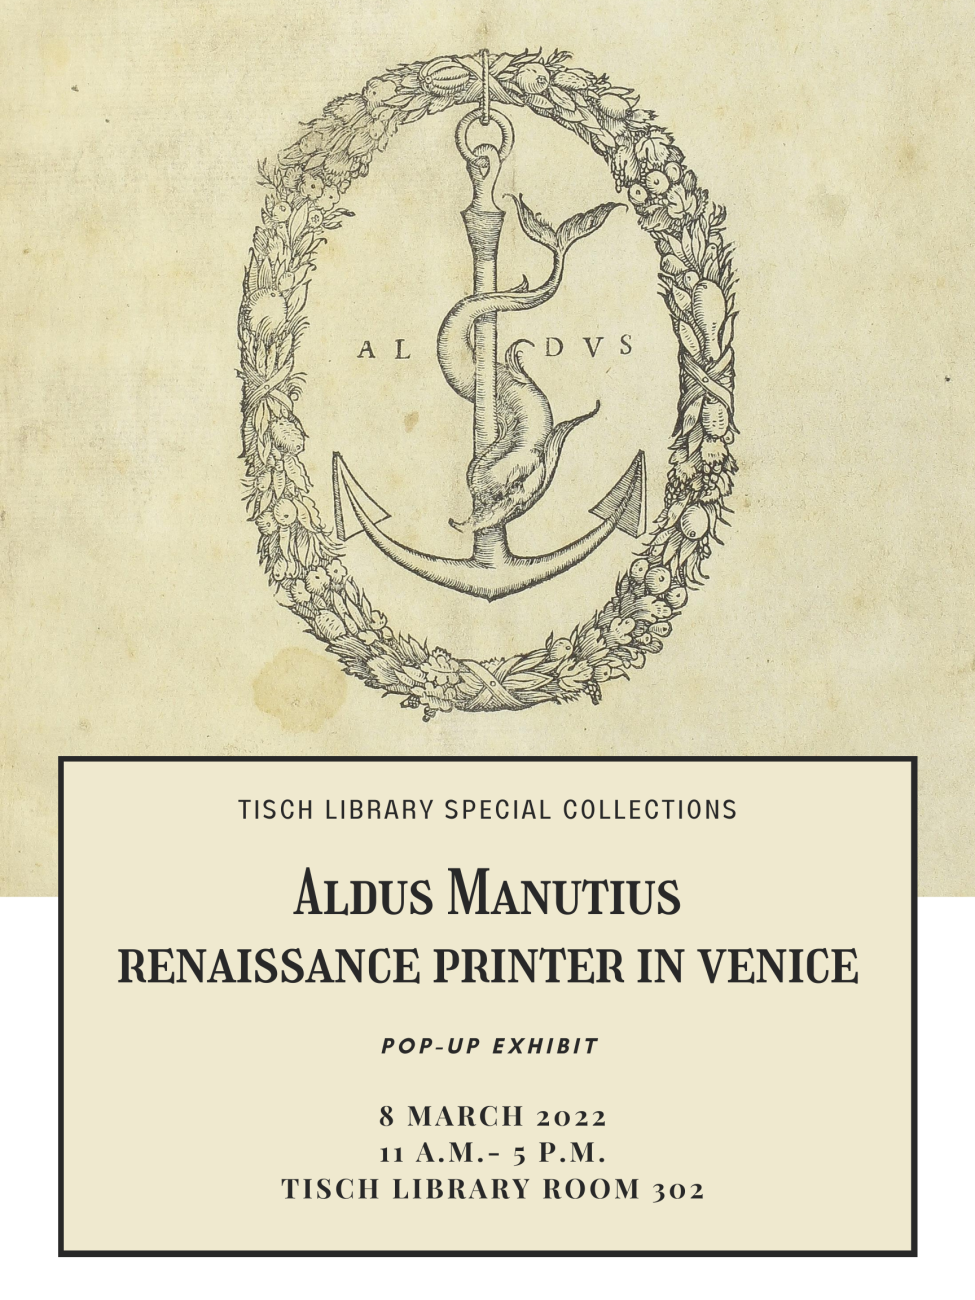 The flyer reads: "Tisch Library Special Collections, Aldus Manutius: Renaissance Printer in Venice Pop-up Exhibit. The event is on the 8th of March from 11am-5pm in Tisch Library room 302.